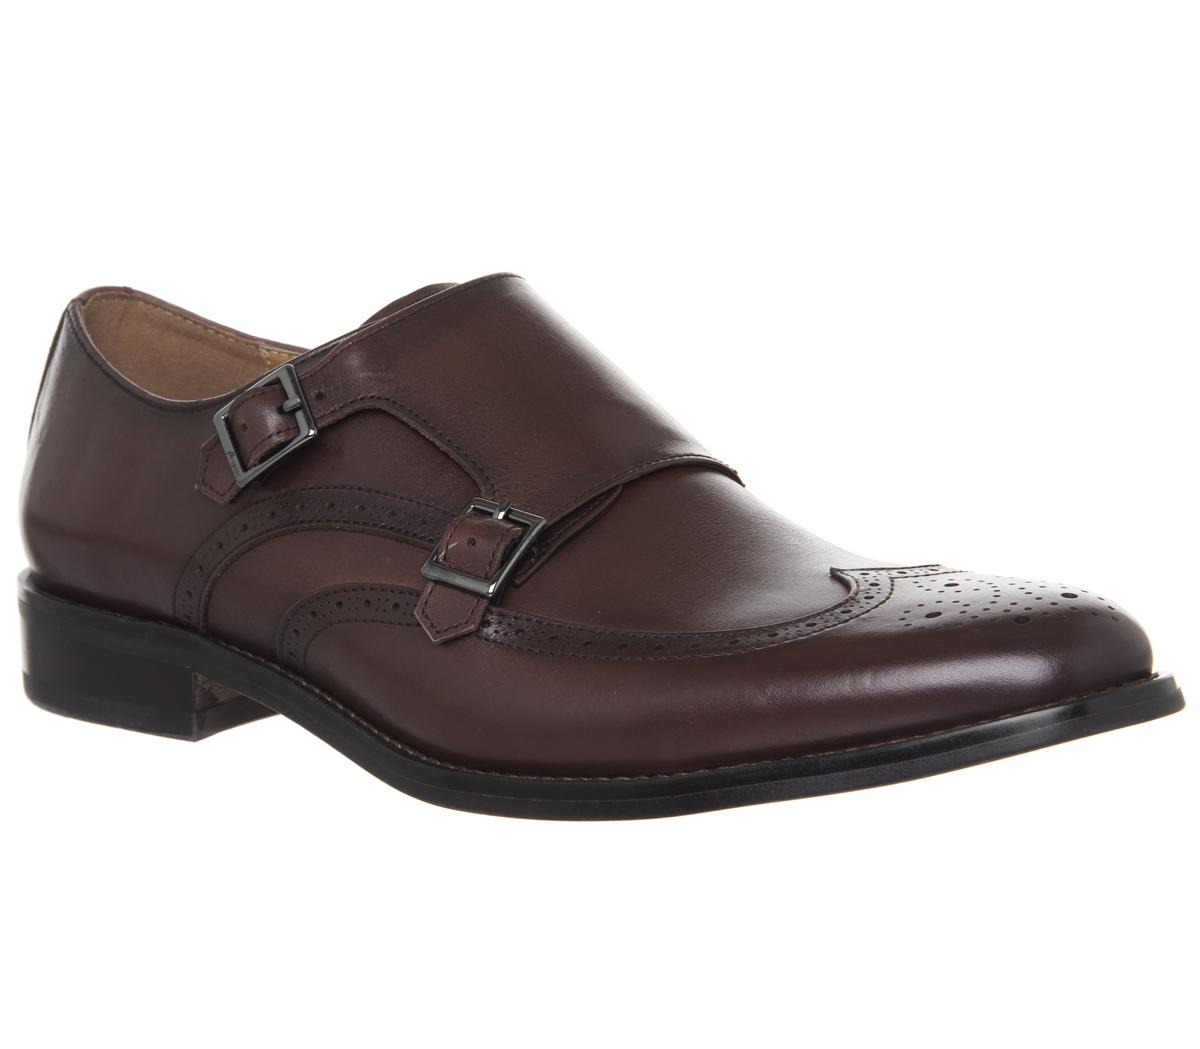 OFFICEImport Brogue Monk ShoesBurgundy Leather